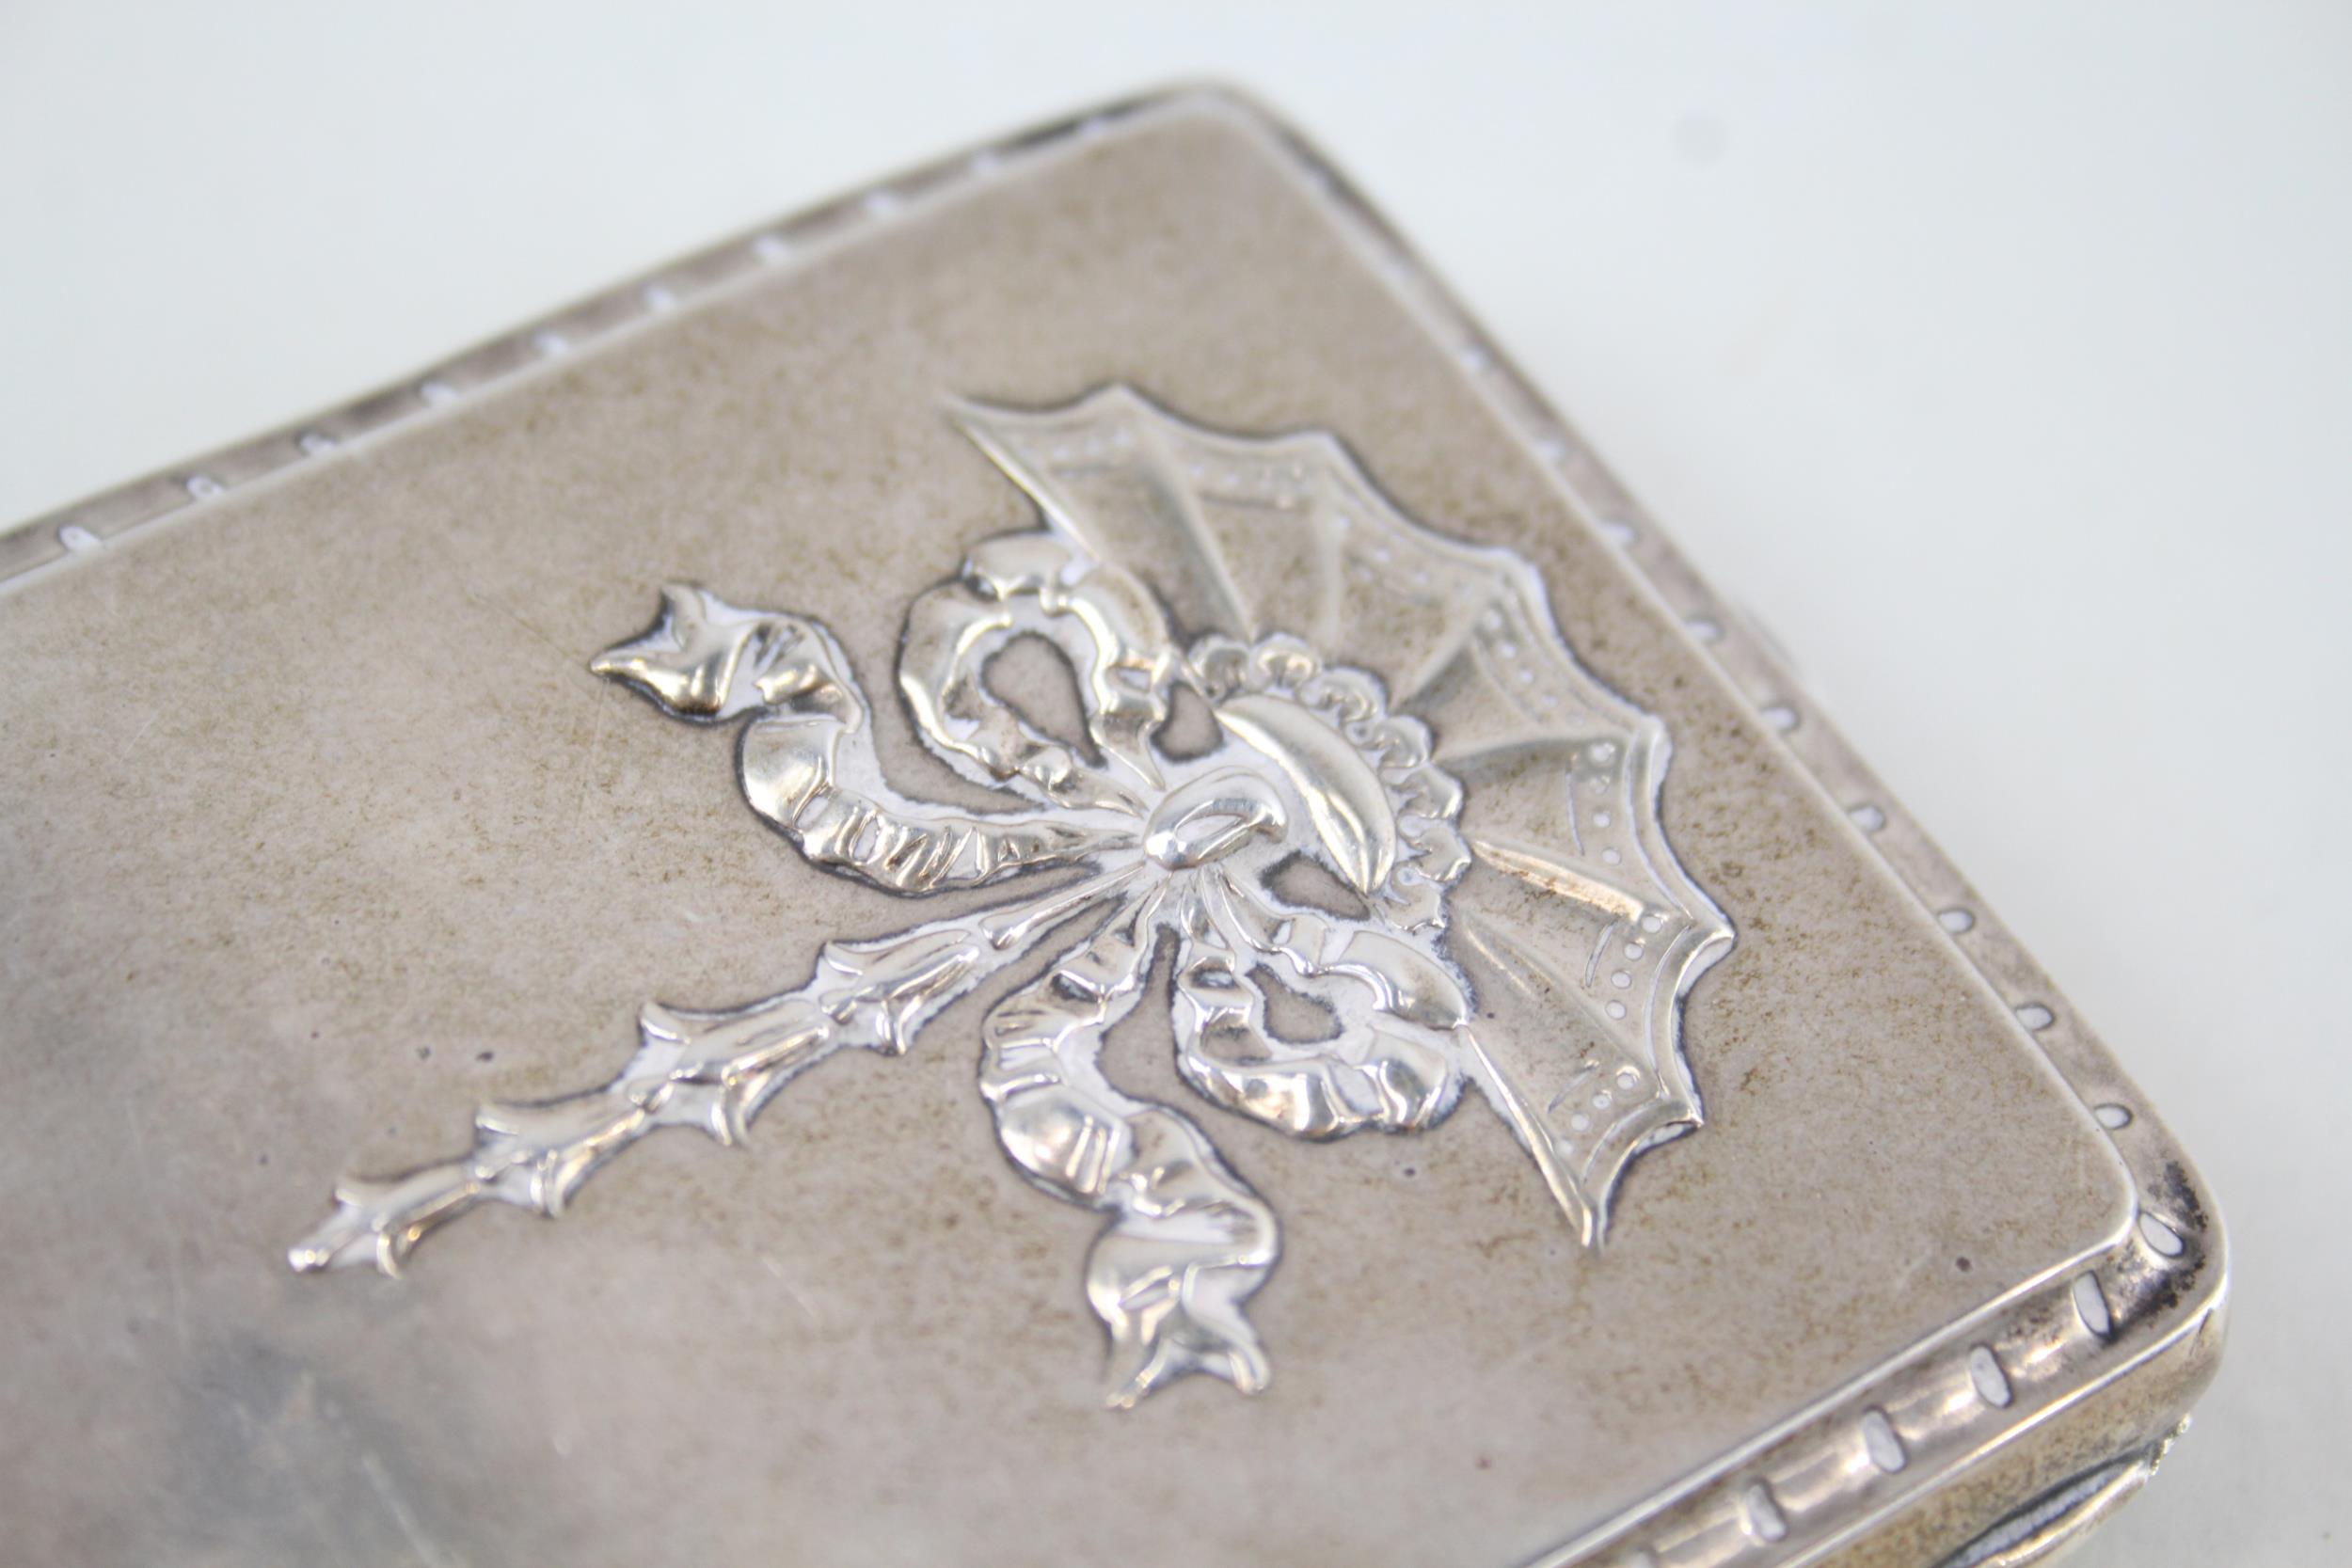 Edwardian 1908 Chester Sterling Silver Ladies Compact / Cigarette Case (125g) - Maker - William - Image 2 of 5